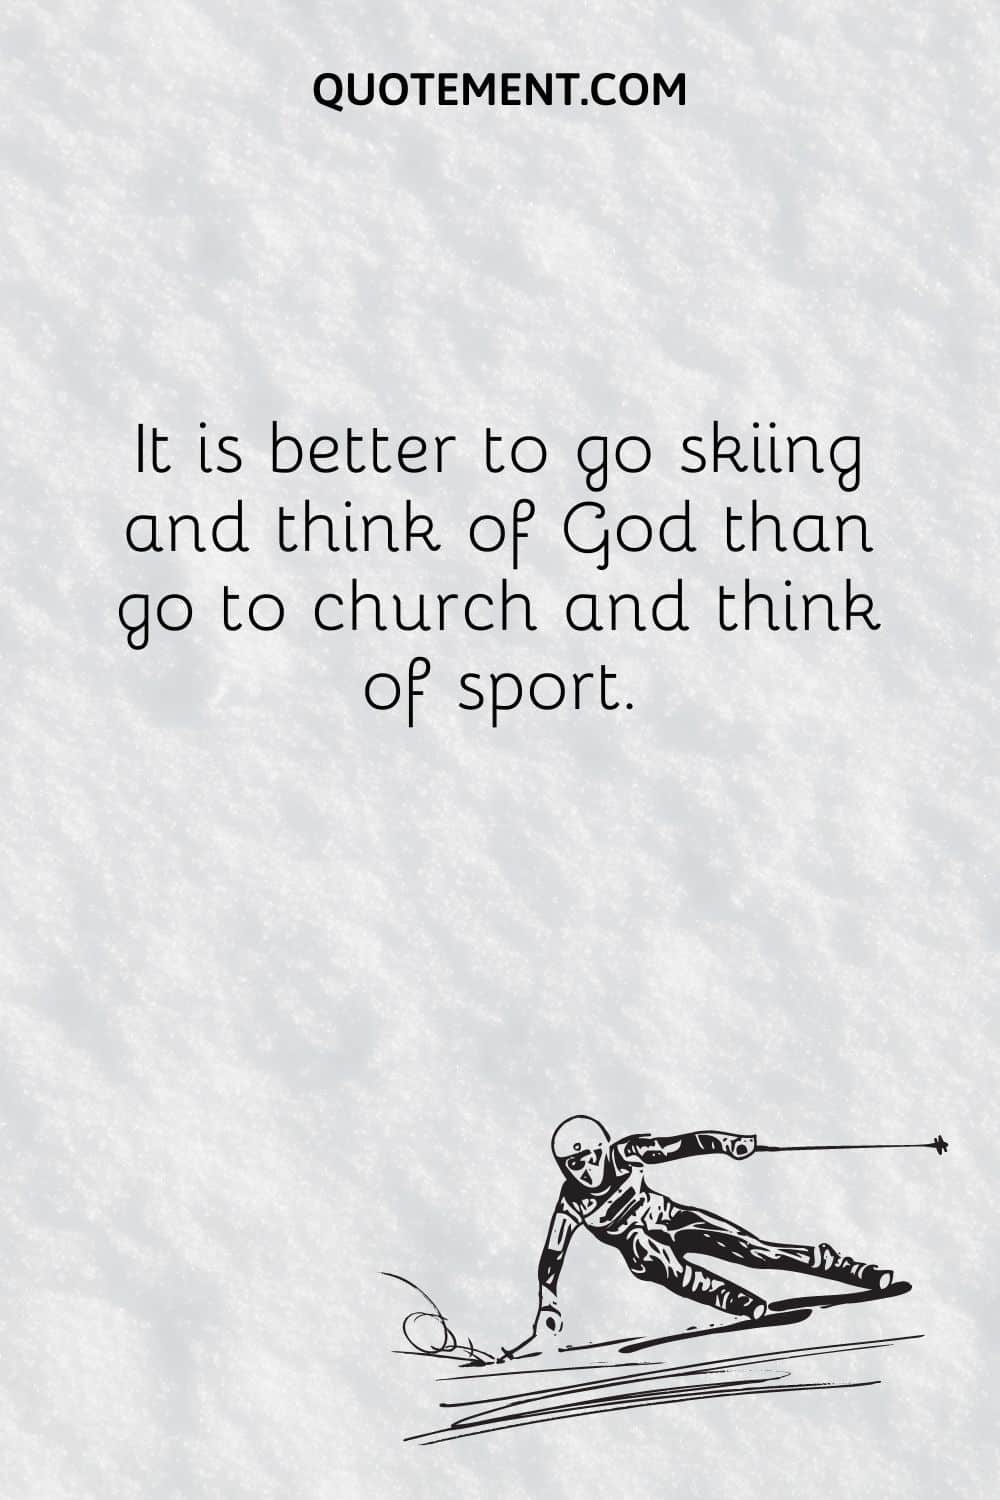 It is better to go skiing and think of God than go to church and think of sport.
